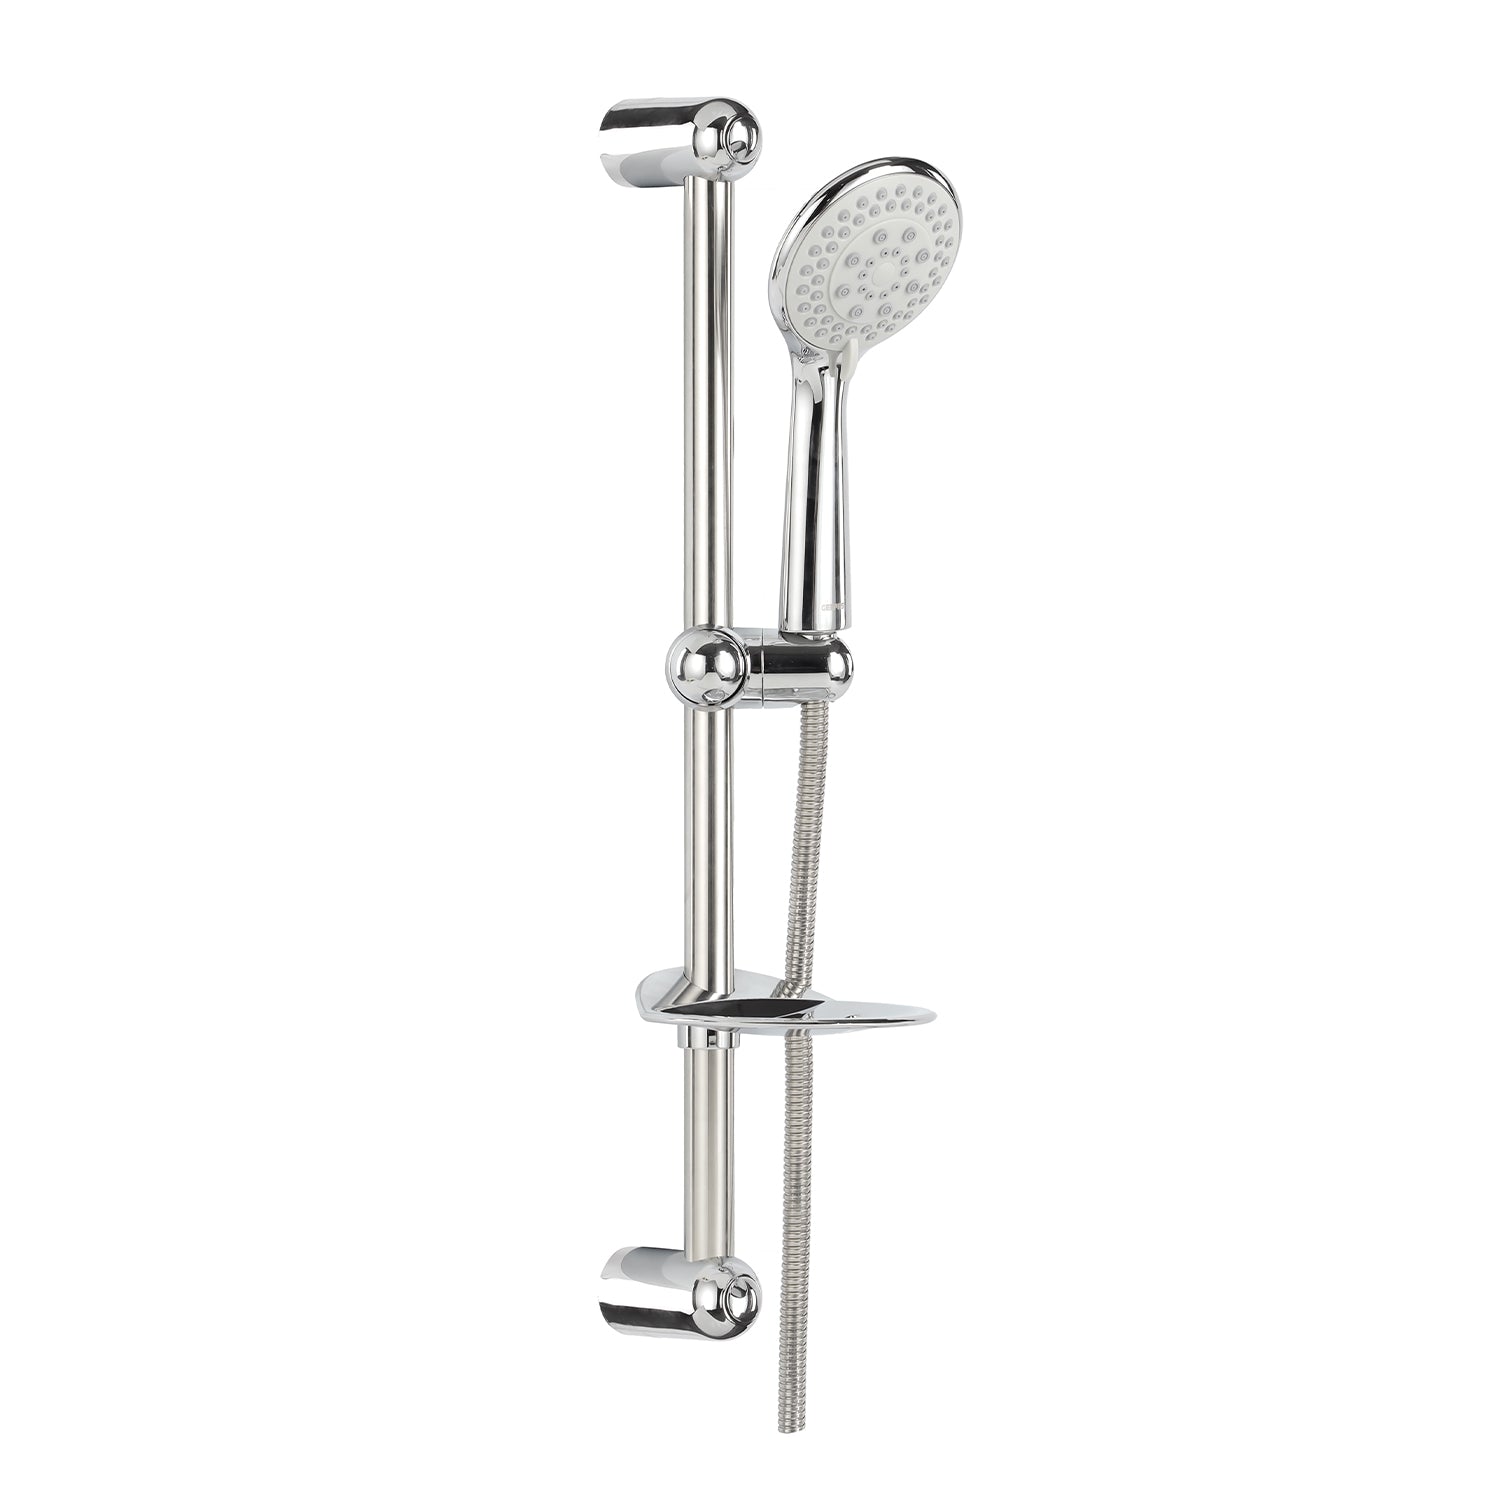 Image of Stainless Steel Sliding Rail Shower Set With High Pressure Shower Head